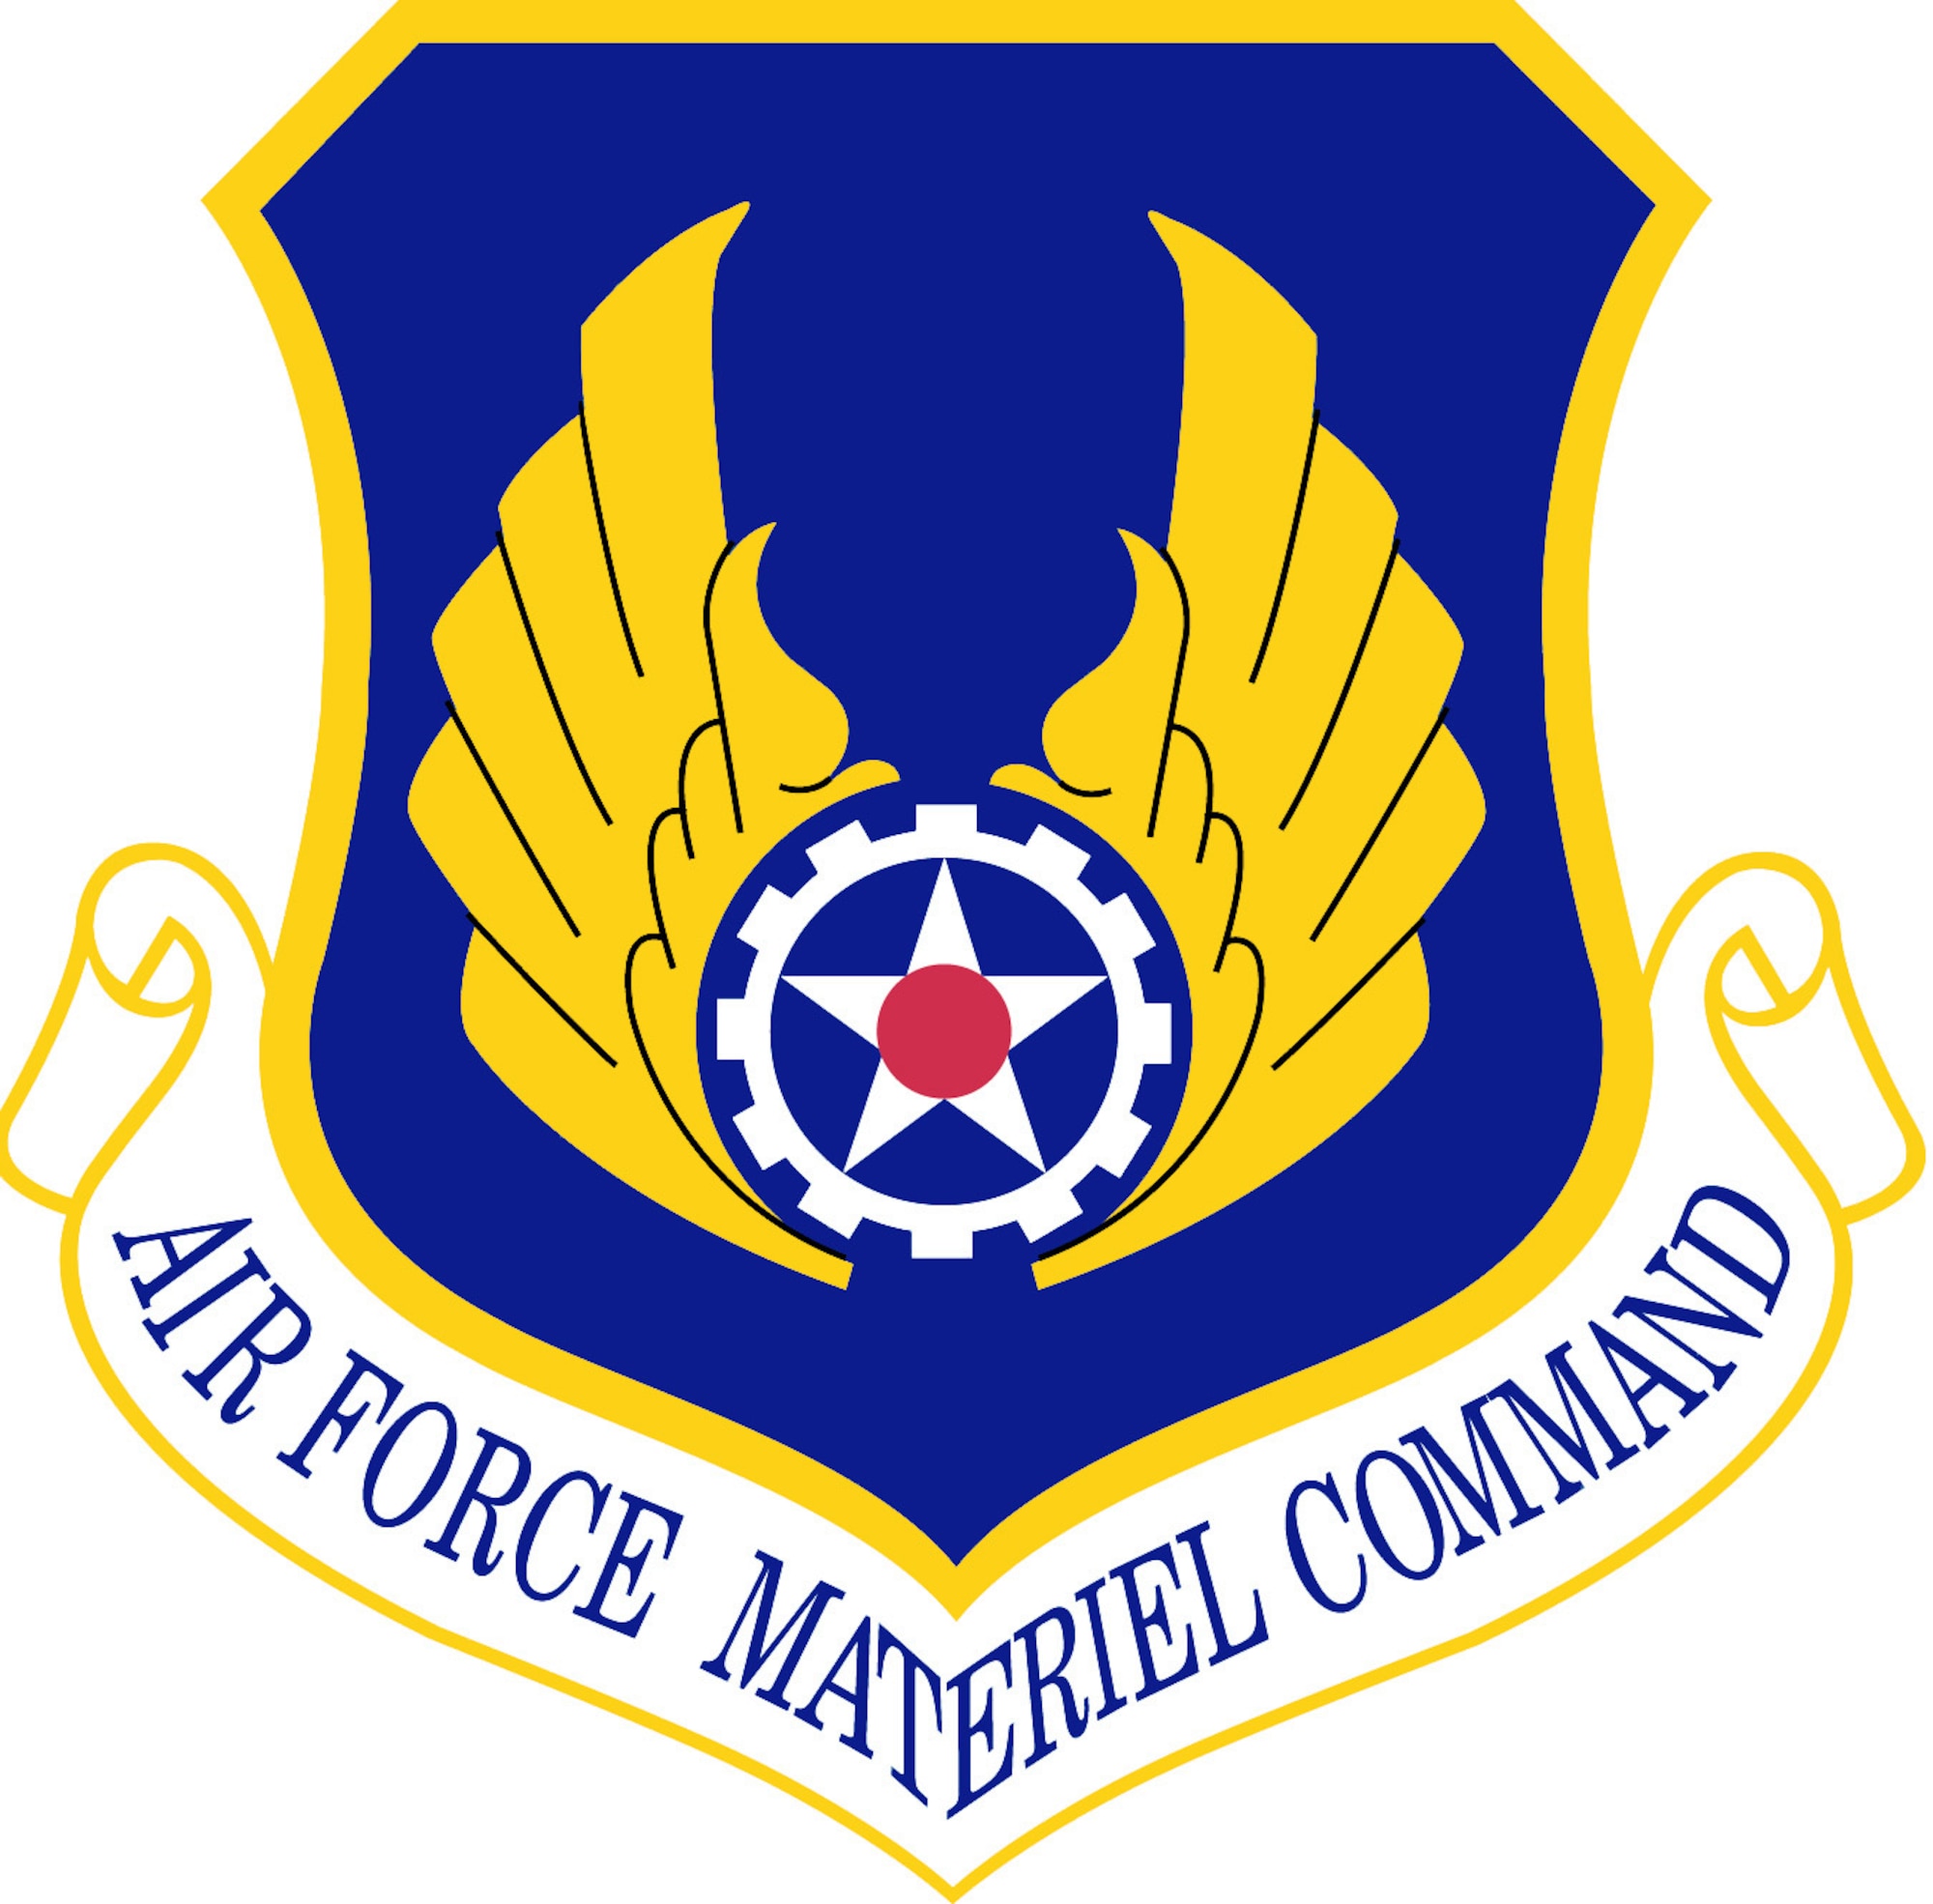 Air Force Materiel Command (AFMC) Shield (Color), U.S. Air Force graphic. In accordance with Chapter 3 of AFI 84-105, commercial reproduction of this emblem is NOT permitted without the permission of the proponent organizational/unit commander. 